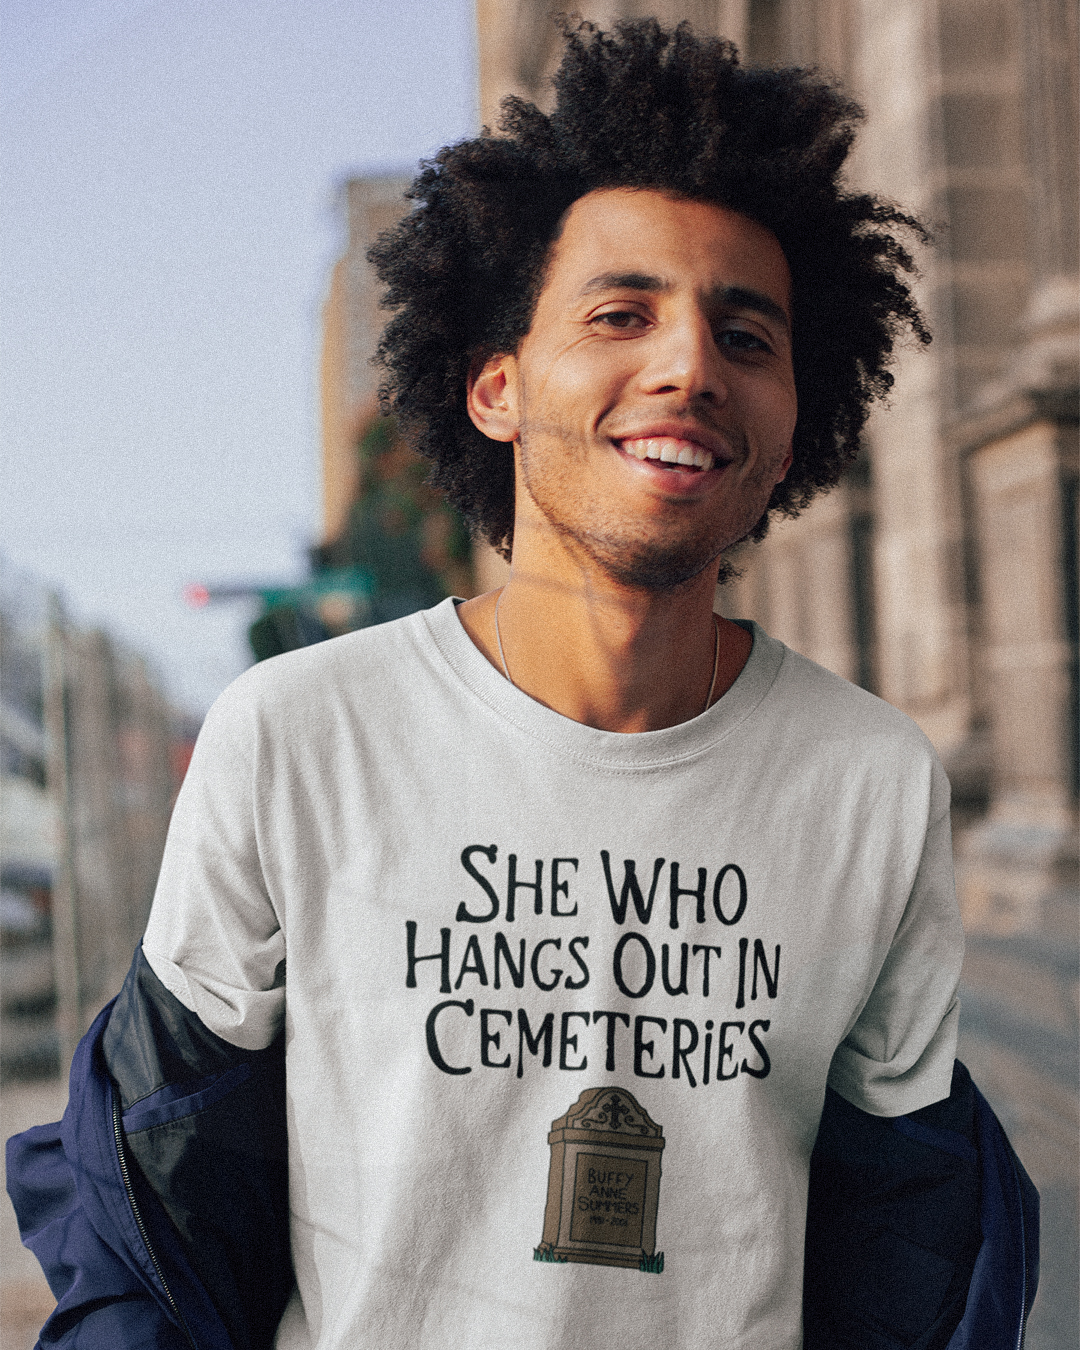 She Who Hangs Out In Cemeteries T-Shirt - Buffy The Vampire Slayer Inspired T-Shirt - Slayer T-Shirt - She Who Hangs Out In Cemeteries Buffy Inspired T-Shirt